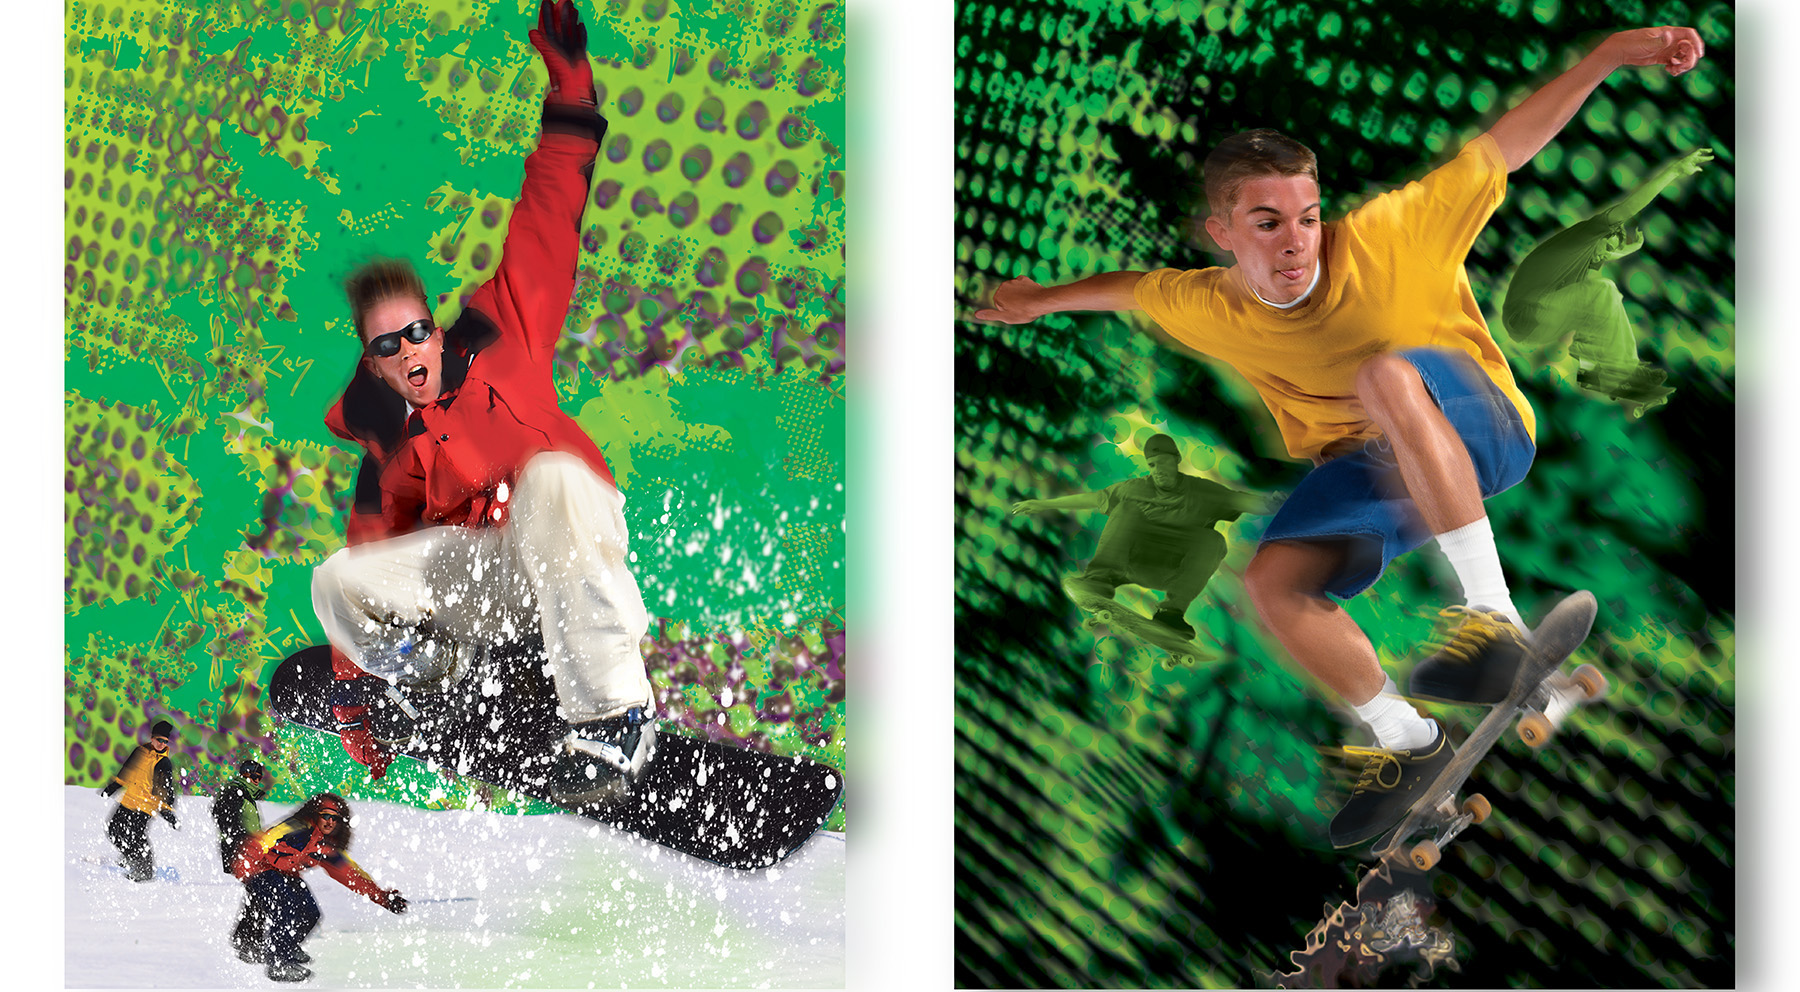 Advertising photograph for Coca Cola USA of snowboarder by Stephen S T Bradley, an advertising, commercial, music video photographer, director and producer working in Dublin, Ireland and throughout Ireland and the UK